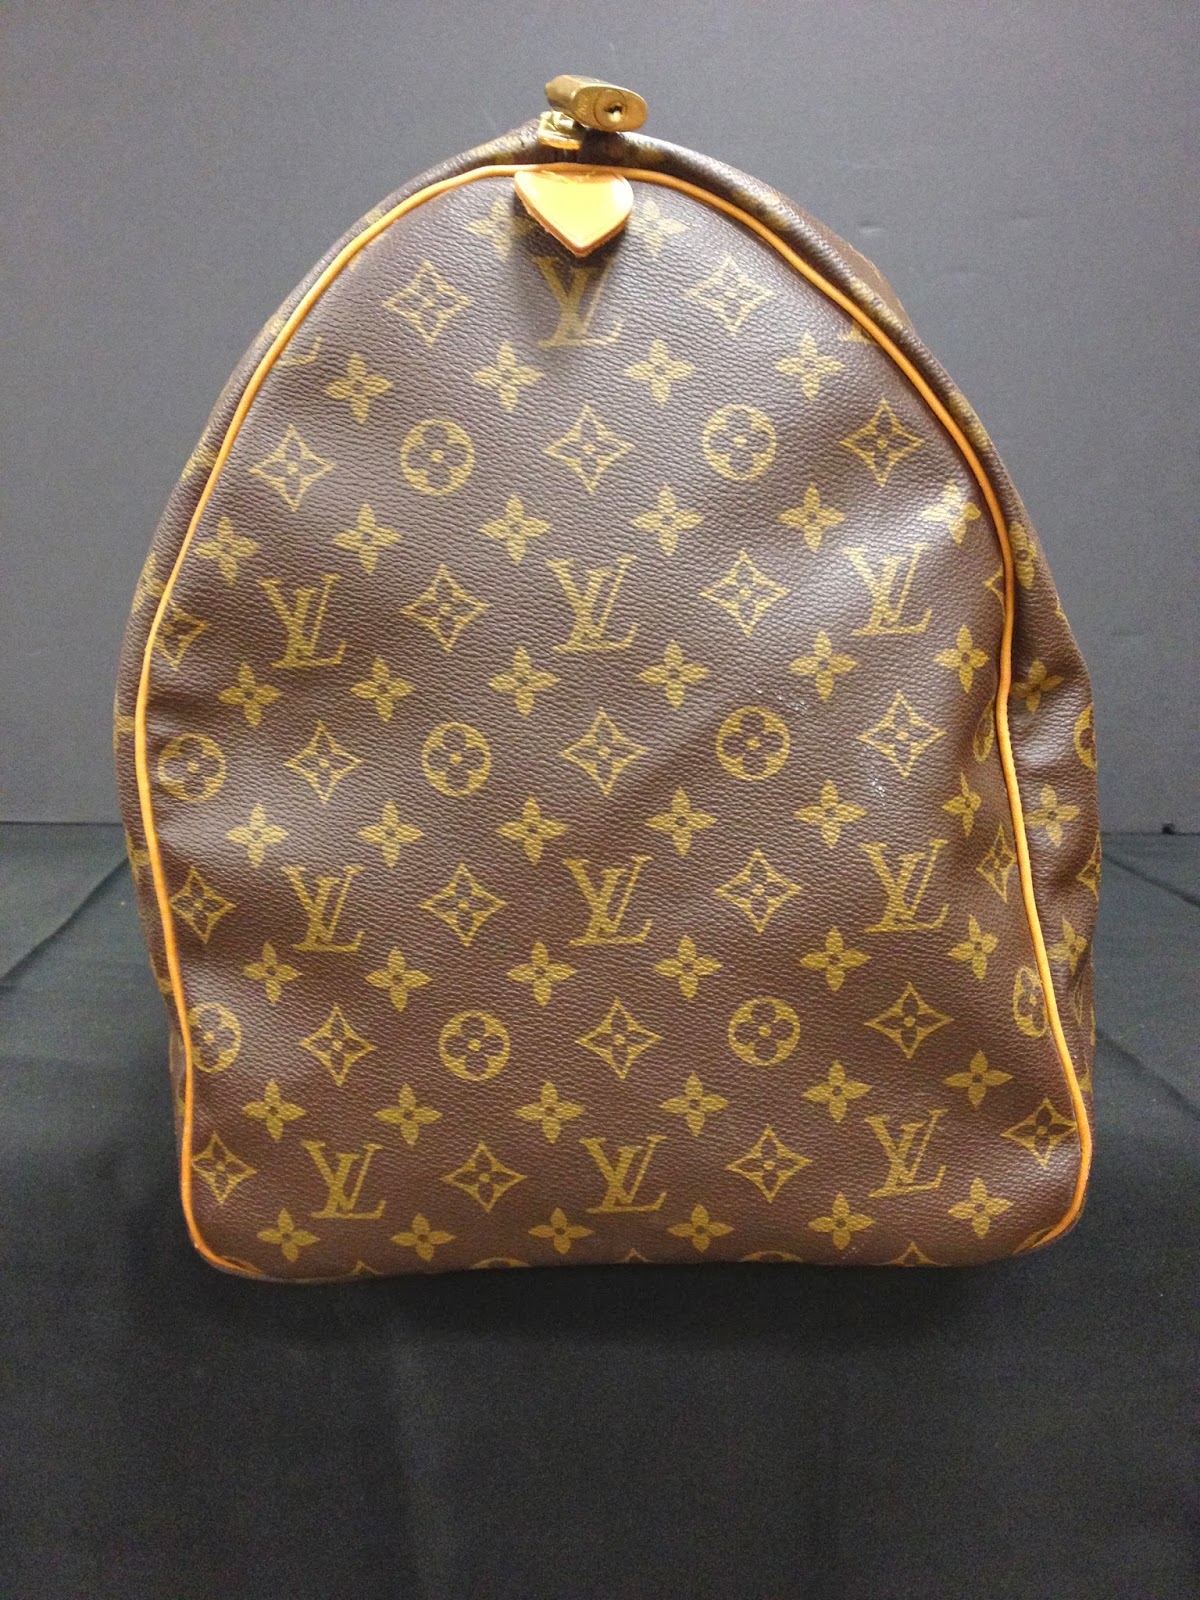 Antiques, Art, and Collectibles: Louis Vuitton Keepall Bandouliere 60 Duffel Bag